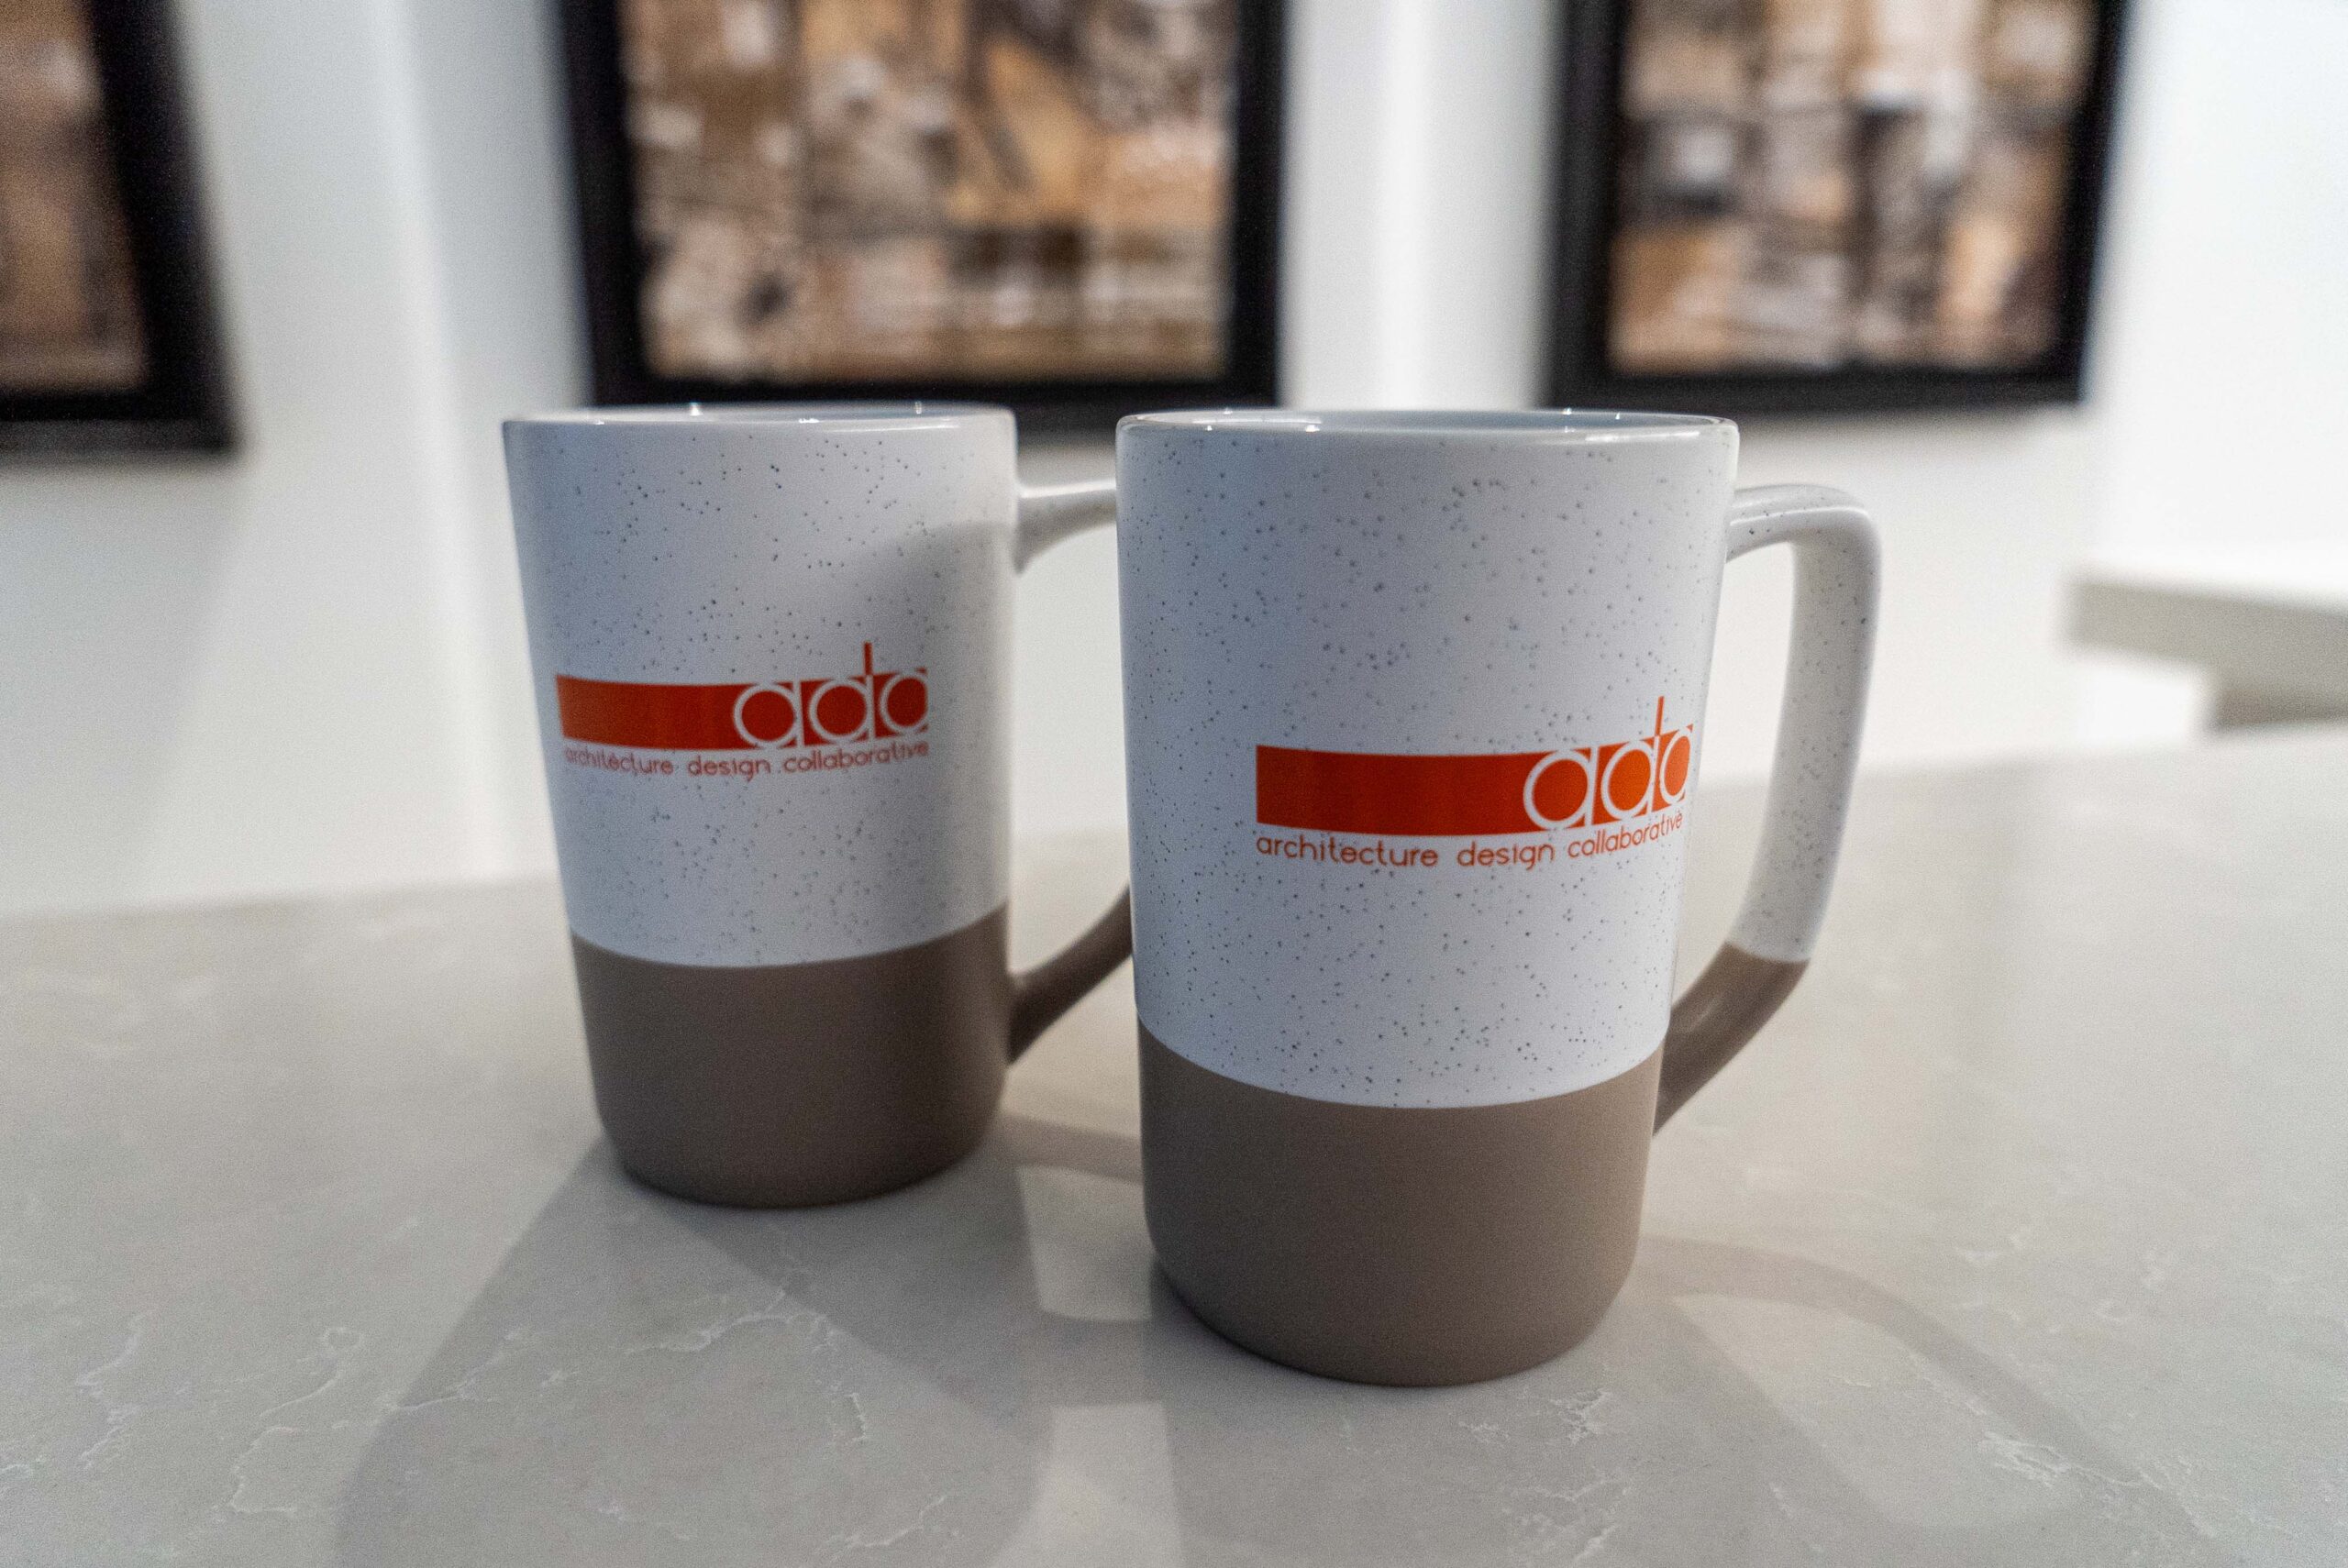 An image of branded mugs at the Architecture Design Collaborative (ADC) office.